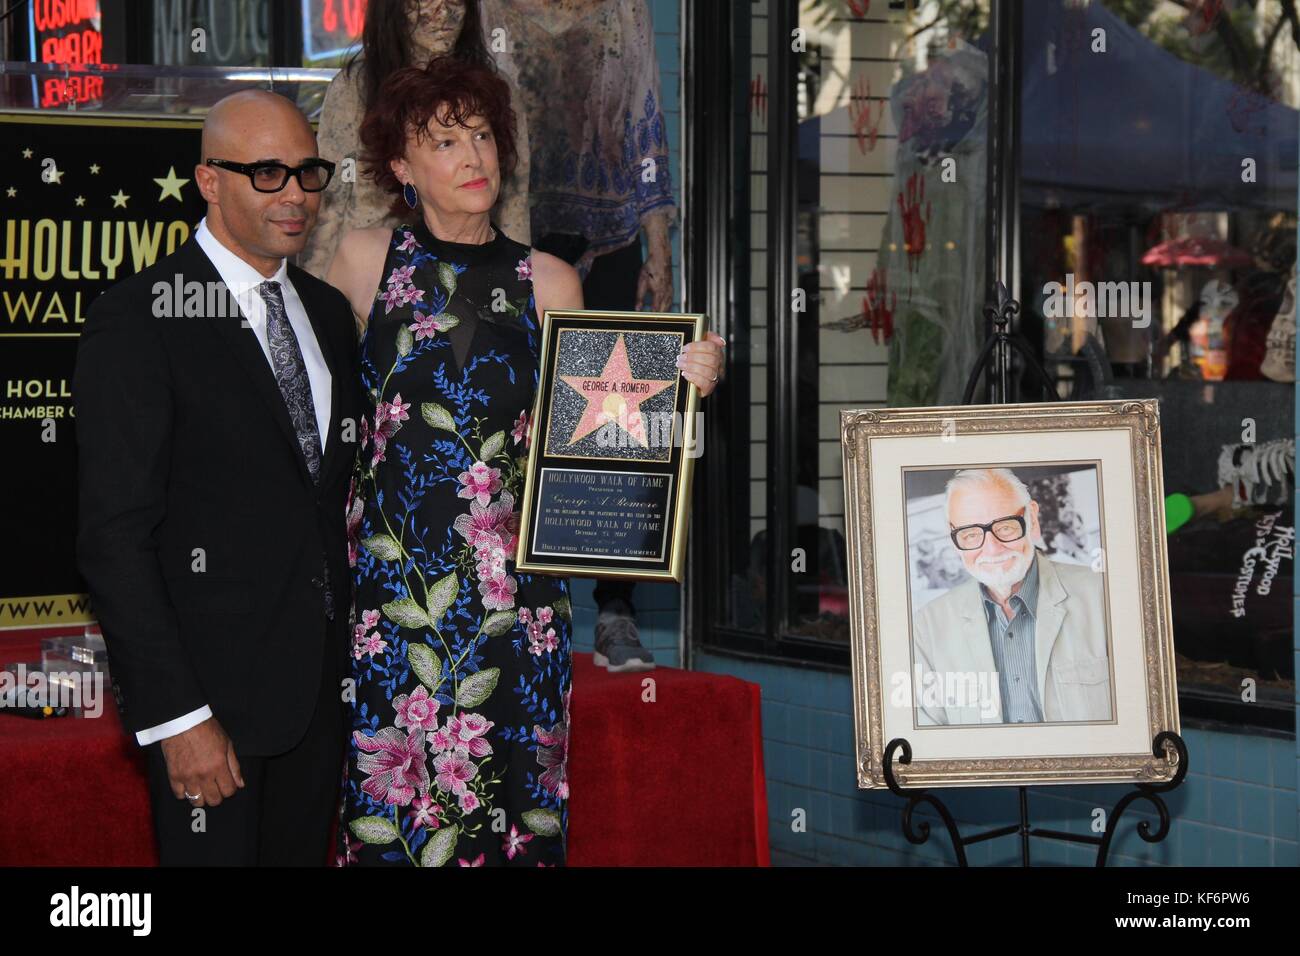 Hollywood, California, USA. 25th Oct, 2017. I15934CHW.The Late GEORGE A. ROMERO Godfather Of The Modern Zombie Film Genre Honored With Posthumous Star On The Hollywood Walk Of Fame .6604 Hollywood Boulevard, Hollywood, CA, USA.10/25/2017. © Clinton H.Wallace/Photomundo International/ Photos Inc Credit: Clinton Wallace/Globe Photos/ZUMA Wire/Alamy Live News Stock Photo